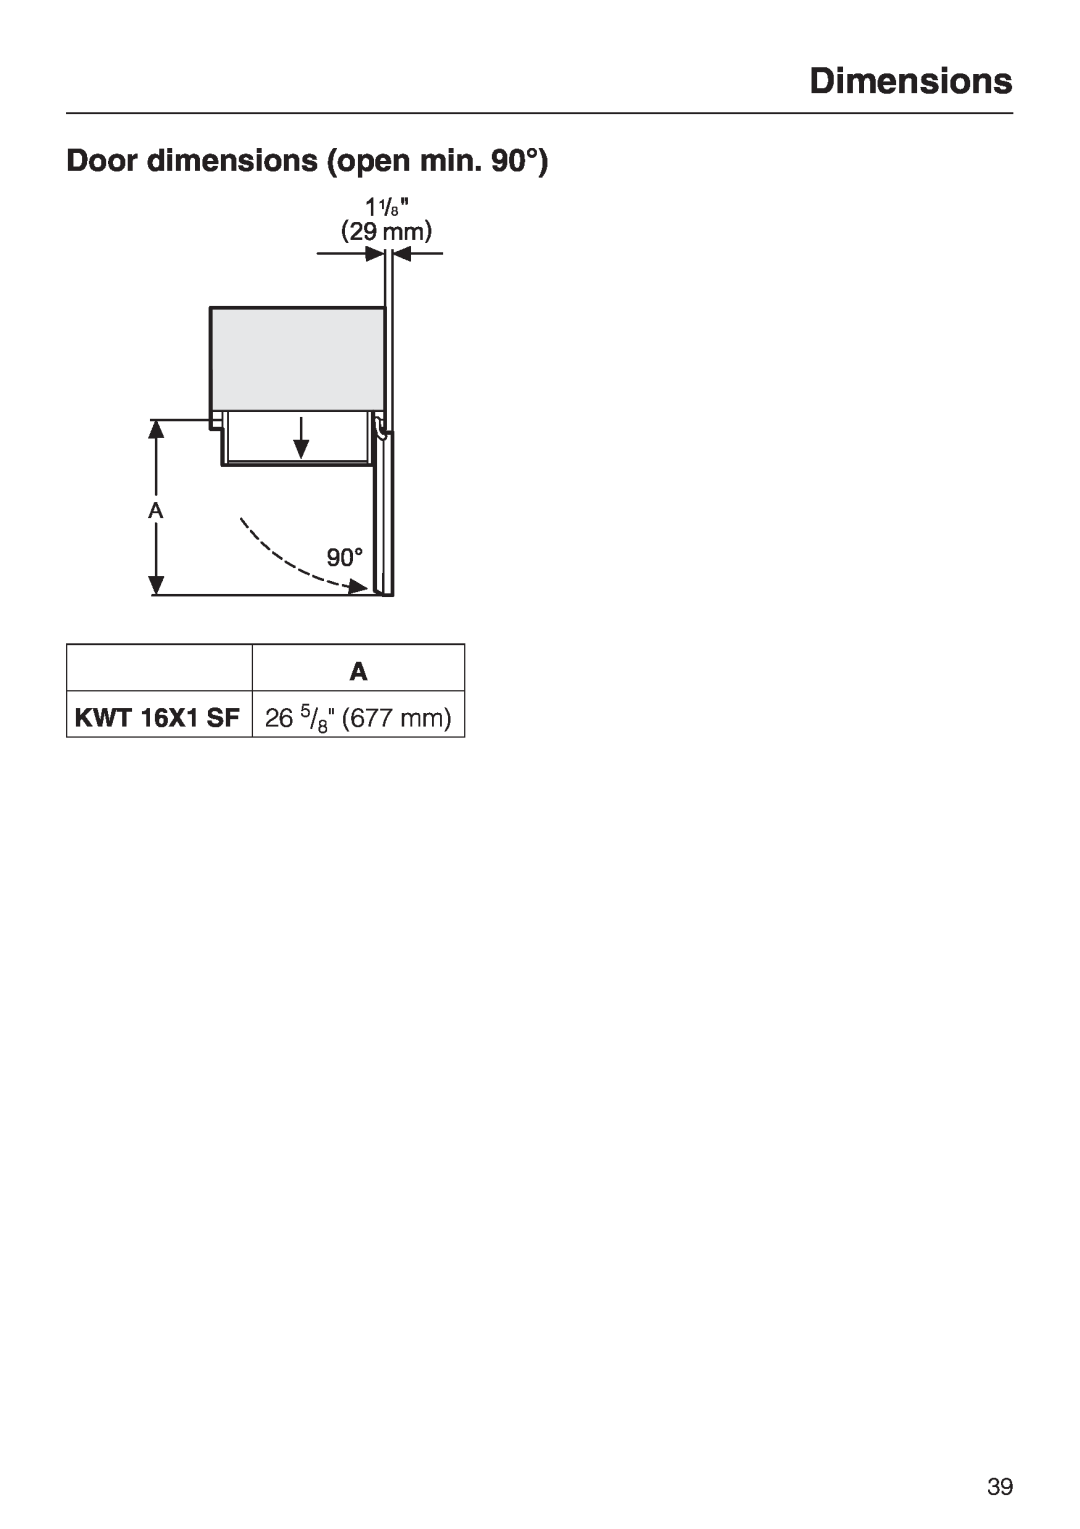 Miele KWT 1611 SF, KWT 1601 SF installation instructions Dimensions, Door dimensions open min, KWT 16X1 SF 